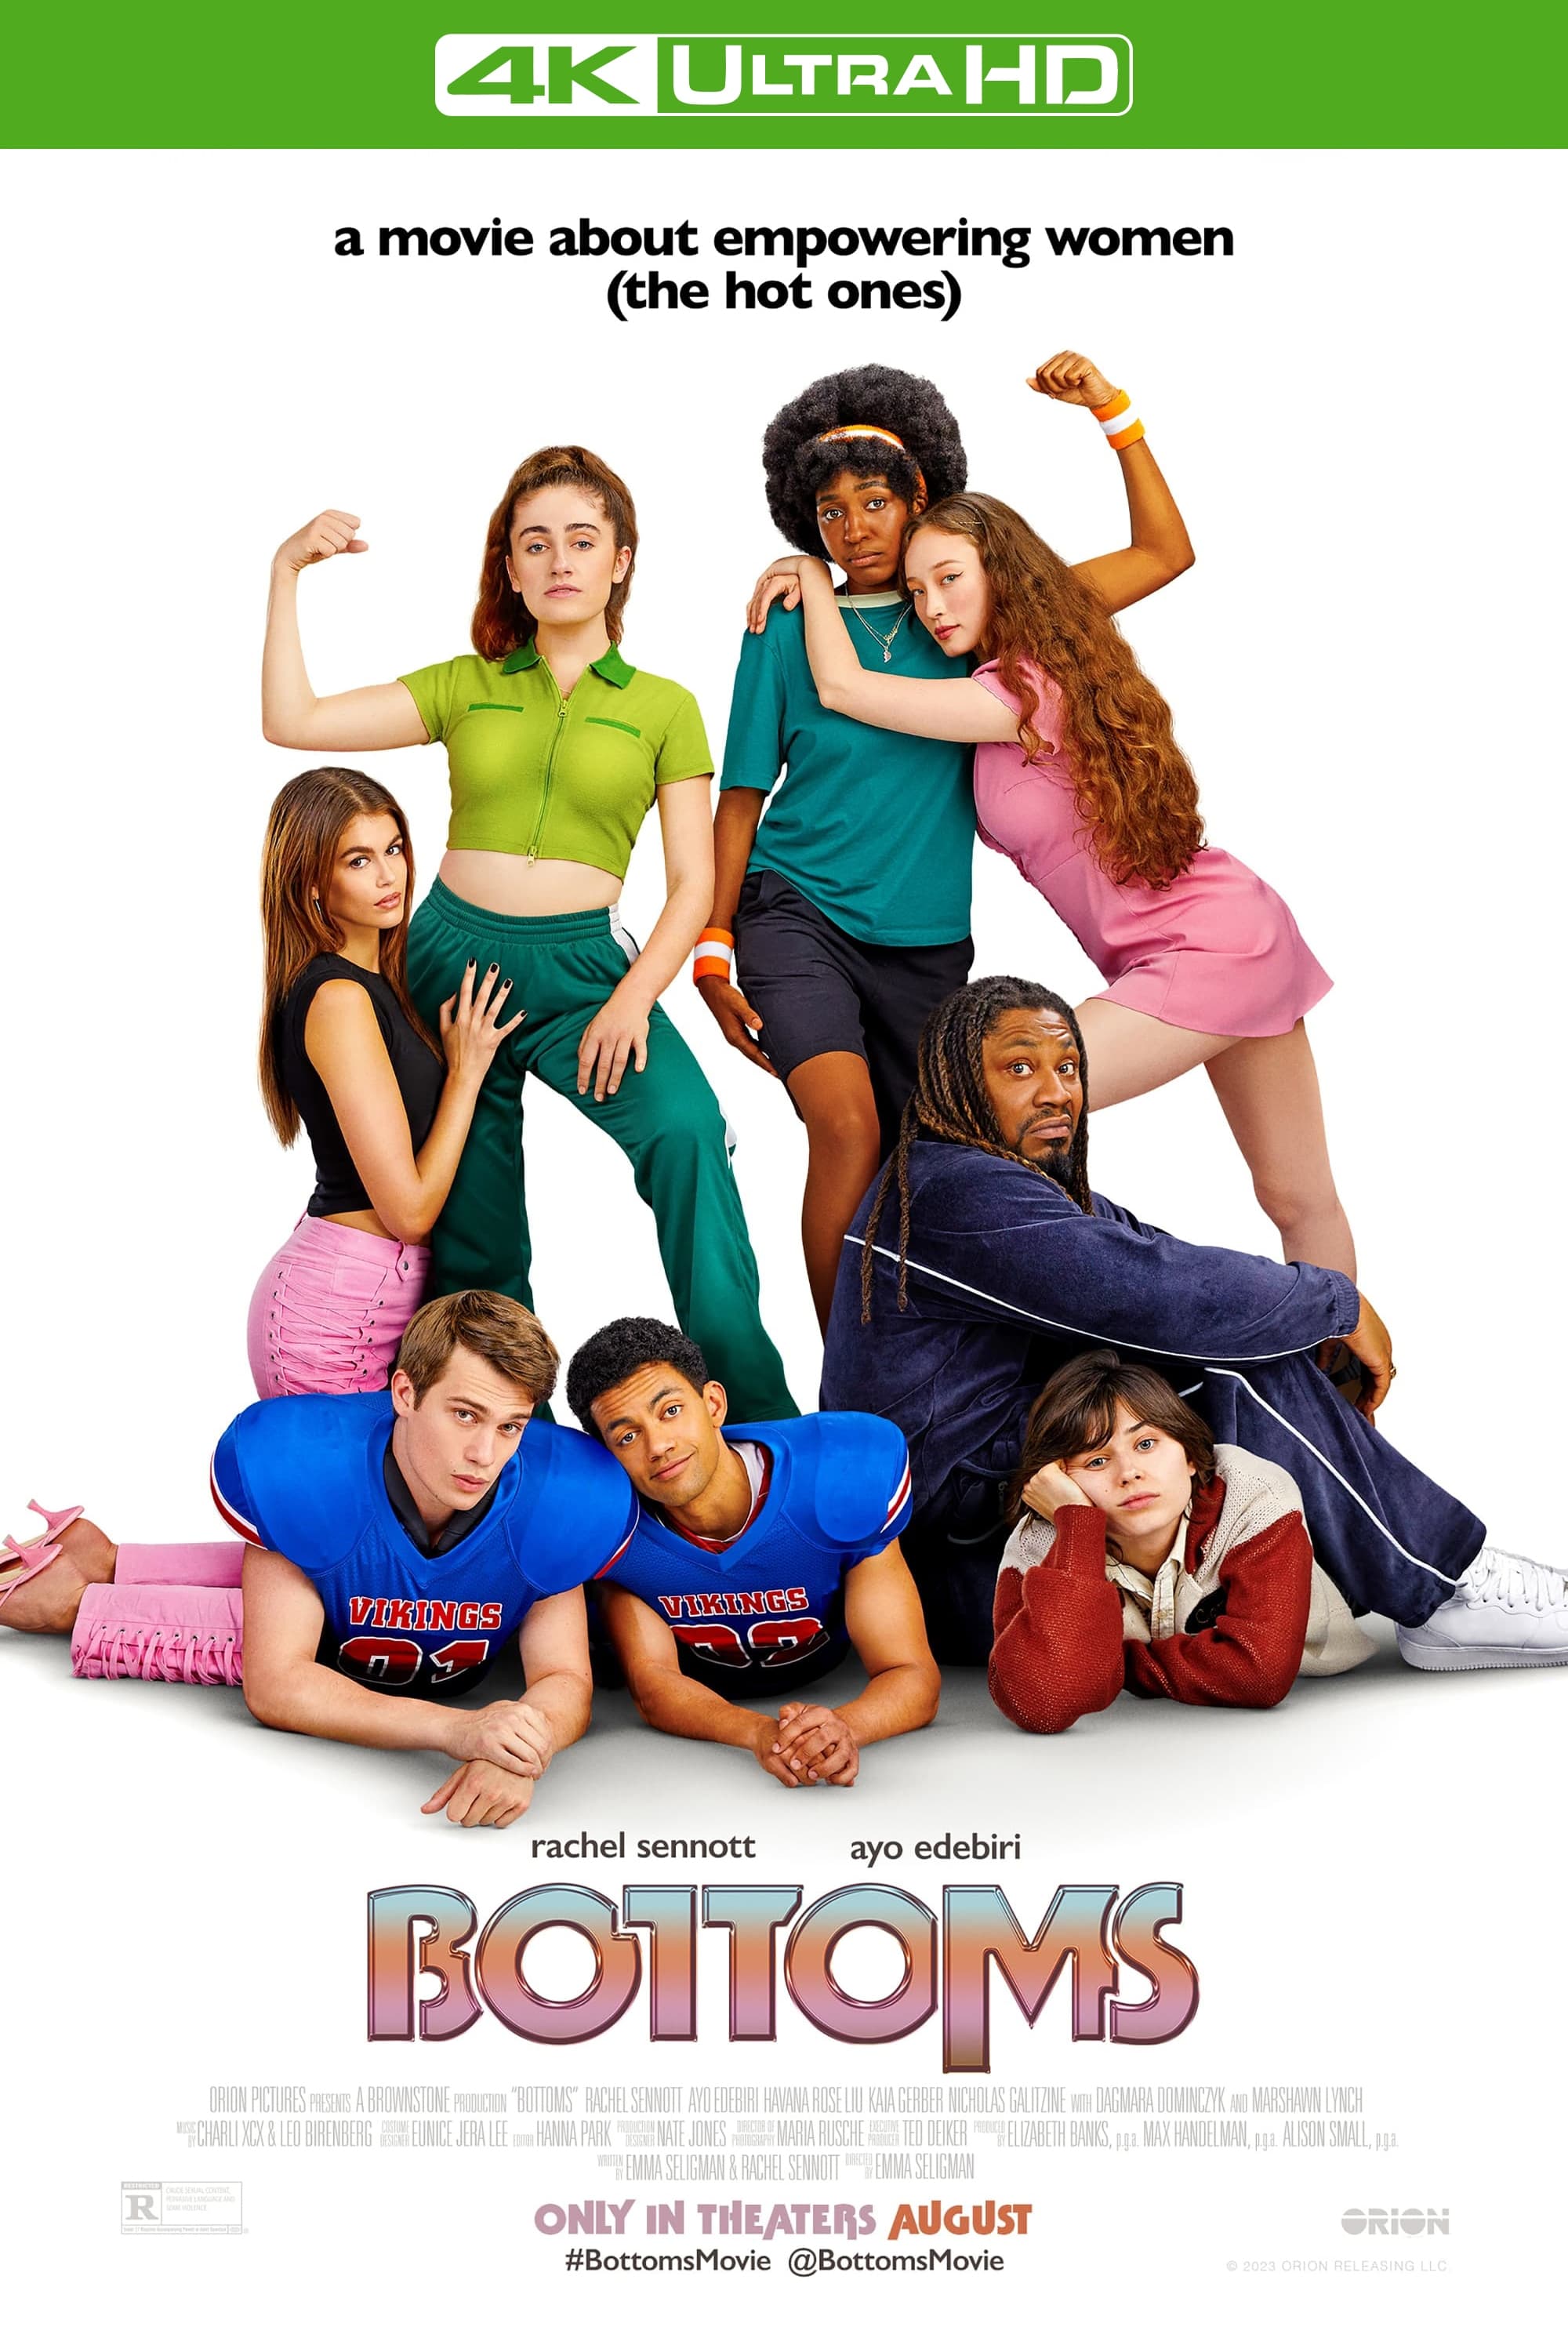 Unpopular best friends PJ and Josie start a high school self-defense club to meet girls and lose their virginity. They soon find themselves in over their heads when the most popular students start beating each other up in the name of self-defense.